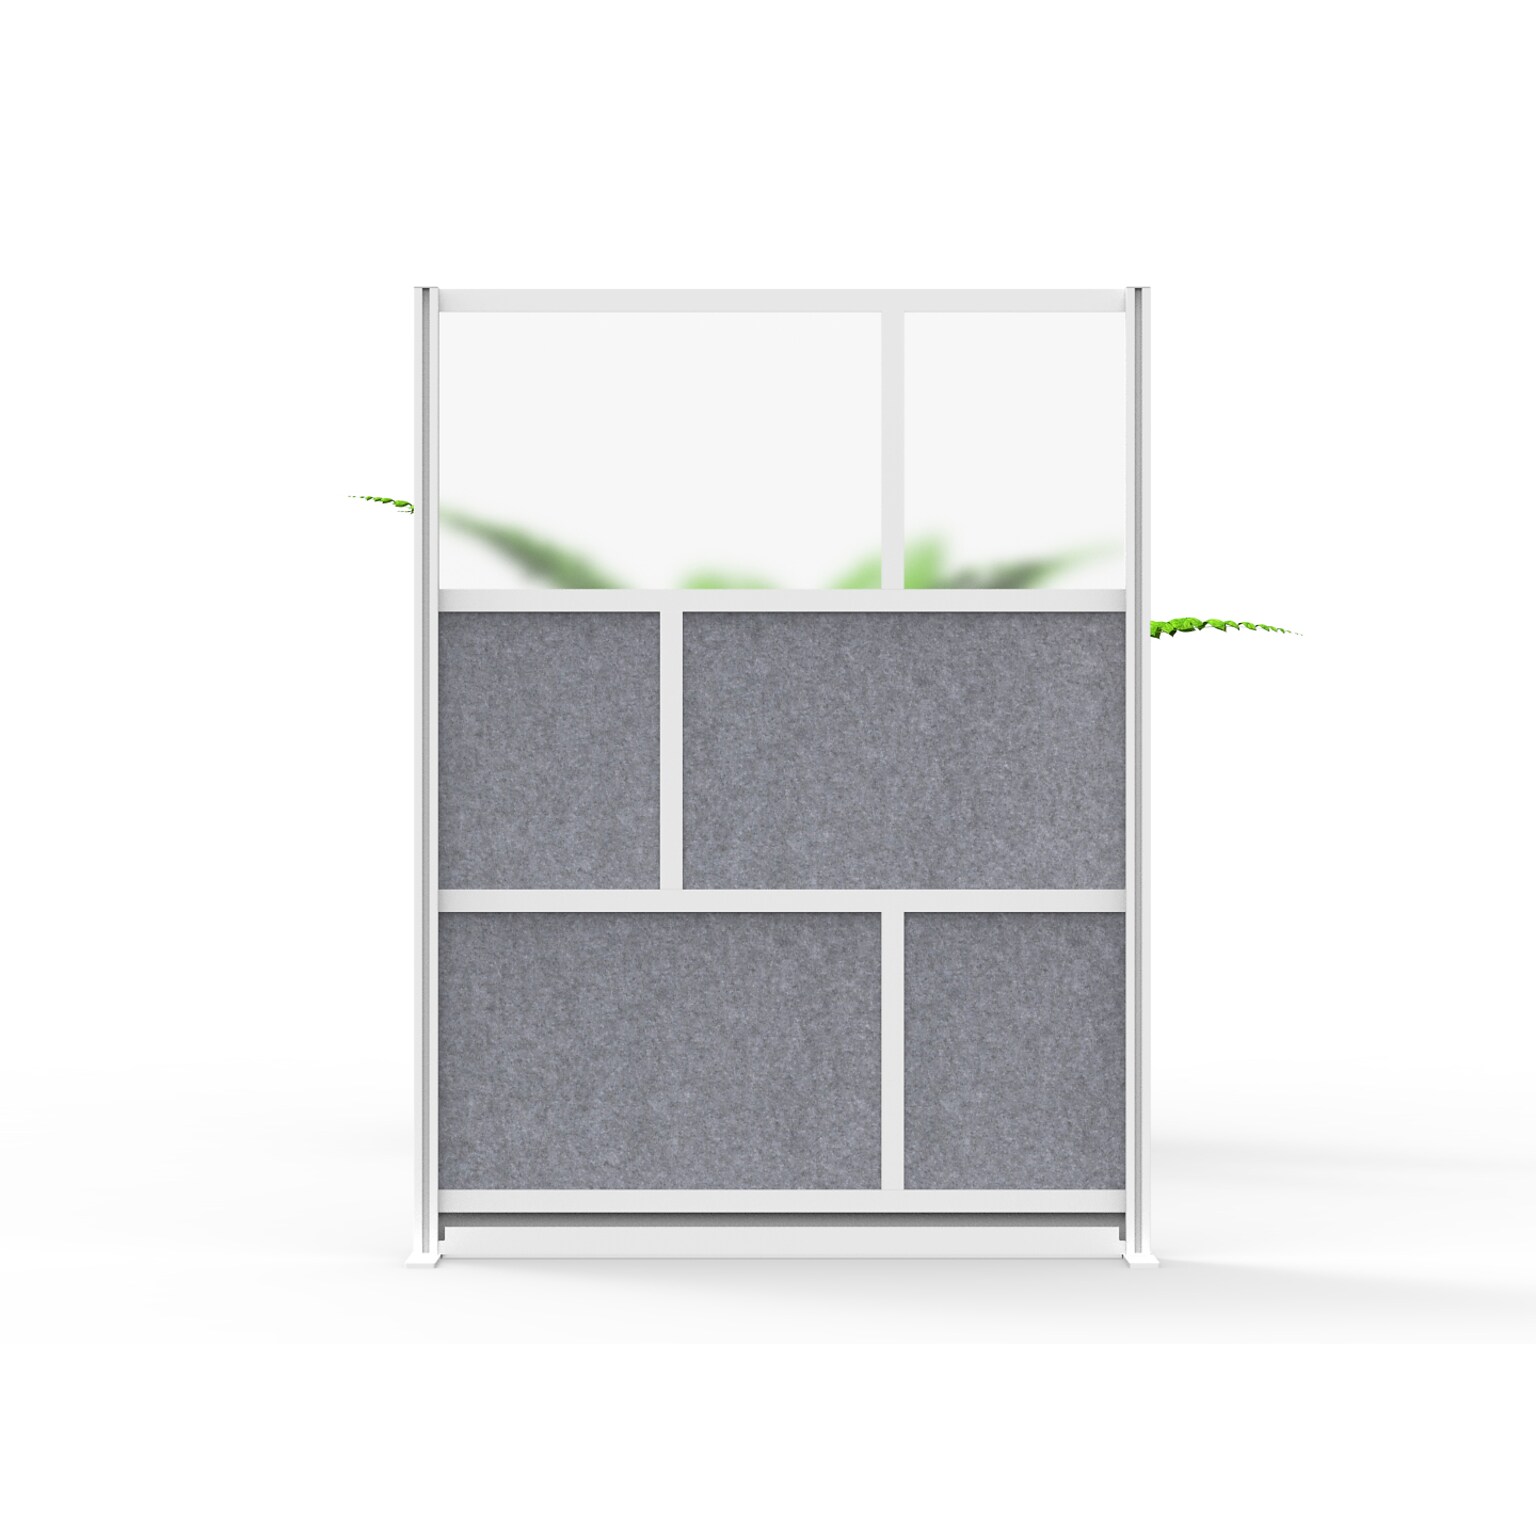 Luxor Modular Room Divider Starter Wall, 70H x 53W, Gray PET/Frosted Acrylic (MW-5370-FCG)